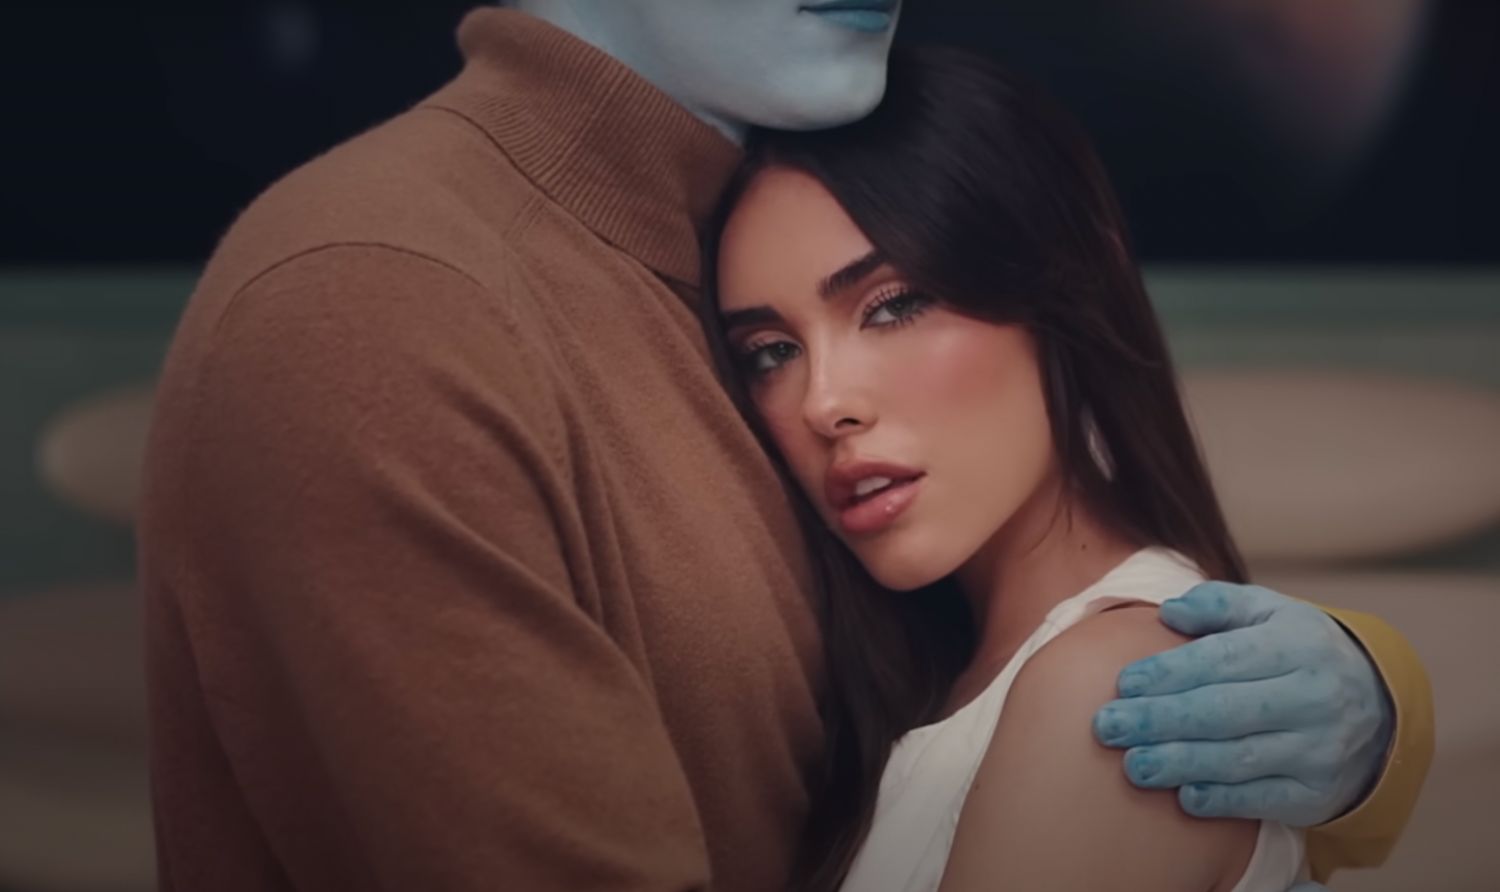 Madison Beer is an out of this world popstar in her new single “Home To